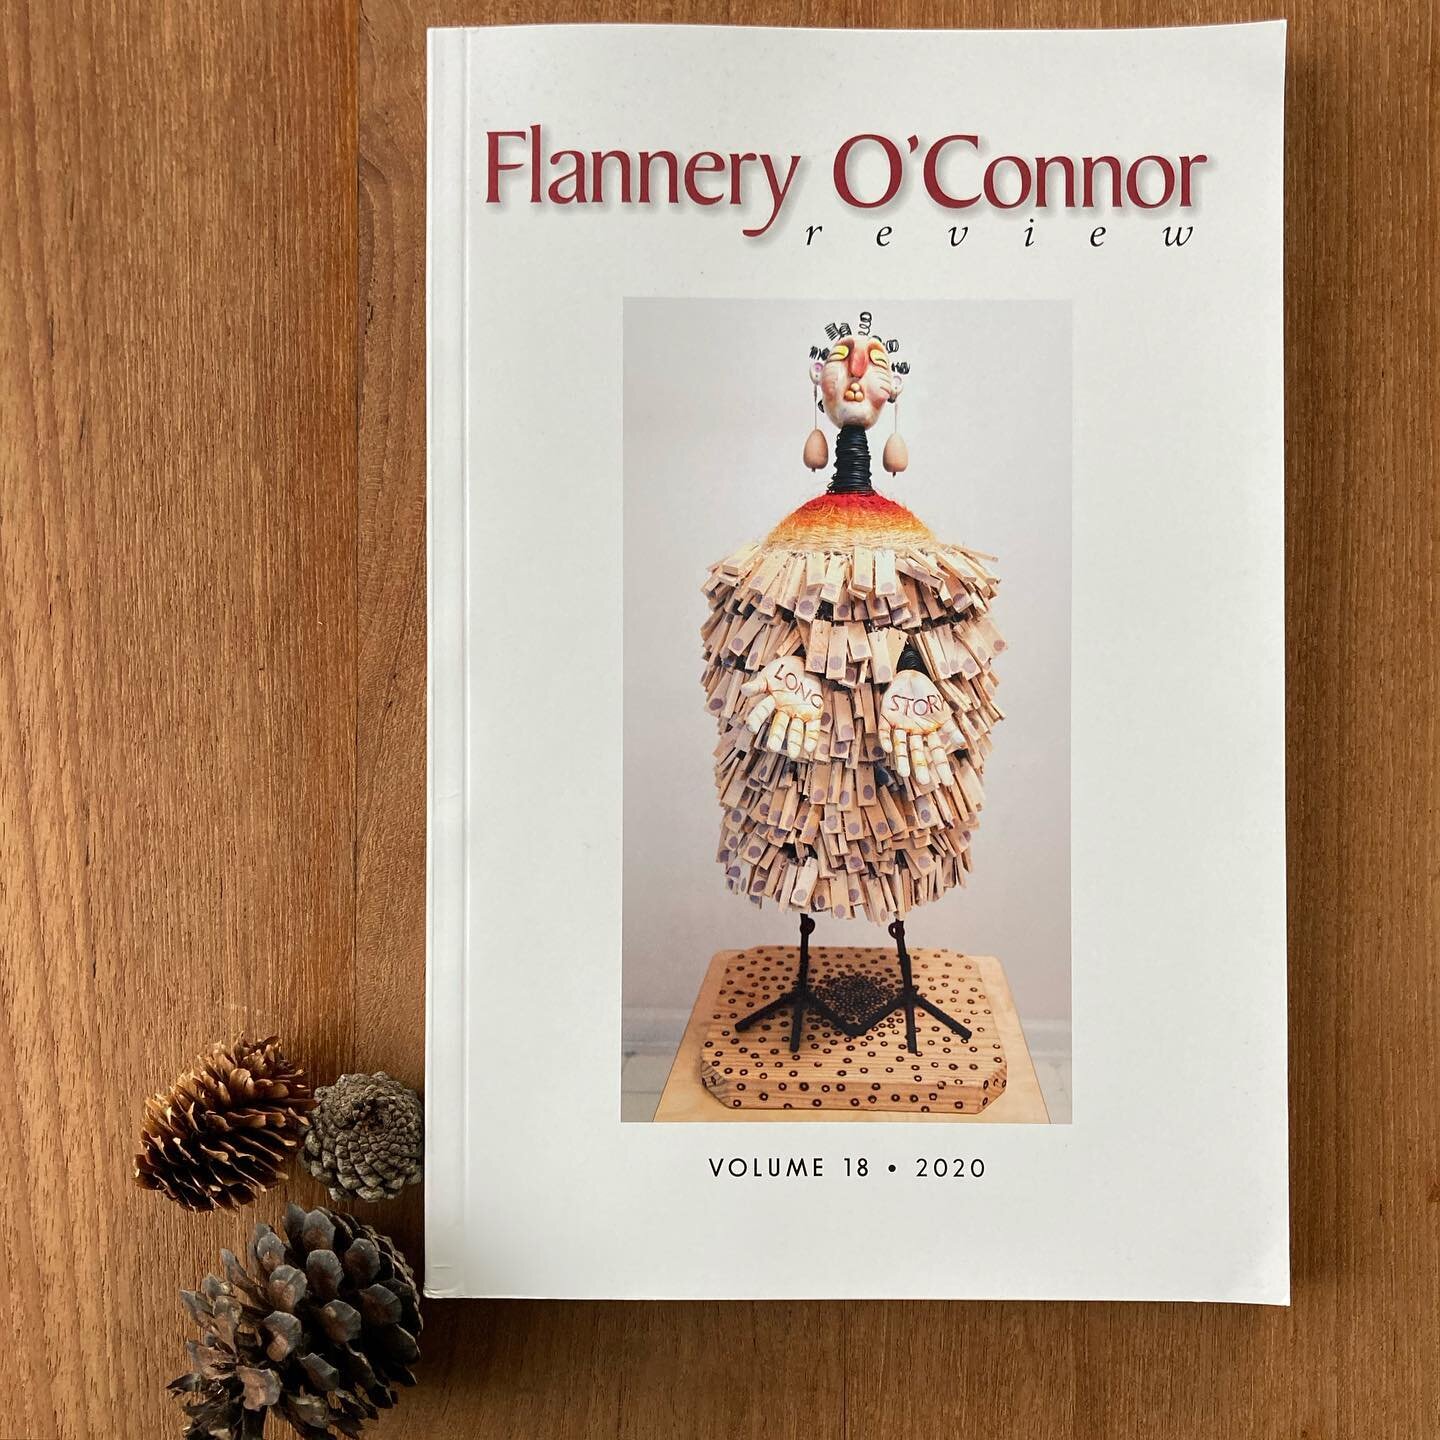 My academic article, &ldquo;Love, Joy, Sorrow: The Summa Theologica and the Devotional Writing of Flannery O&rsquo;Connor,&rdquo; was published in the August 2020 volume of the Flannery O&rsquo;Connor Review, a scholarly journal dedicated to the inte